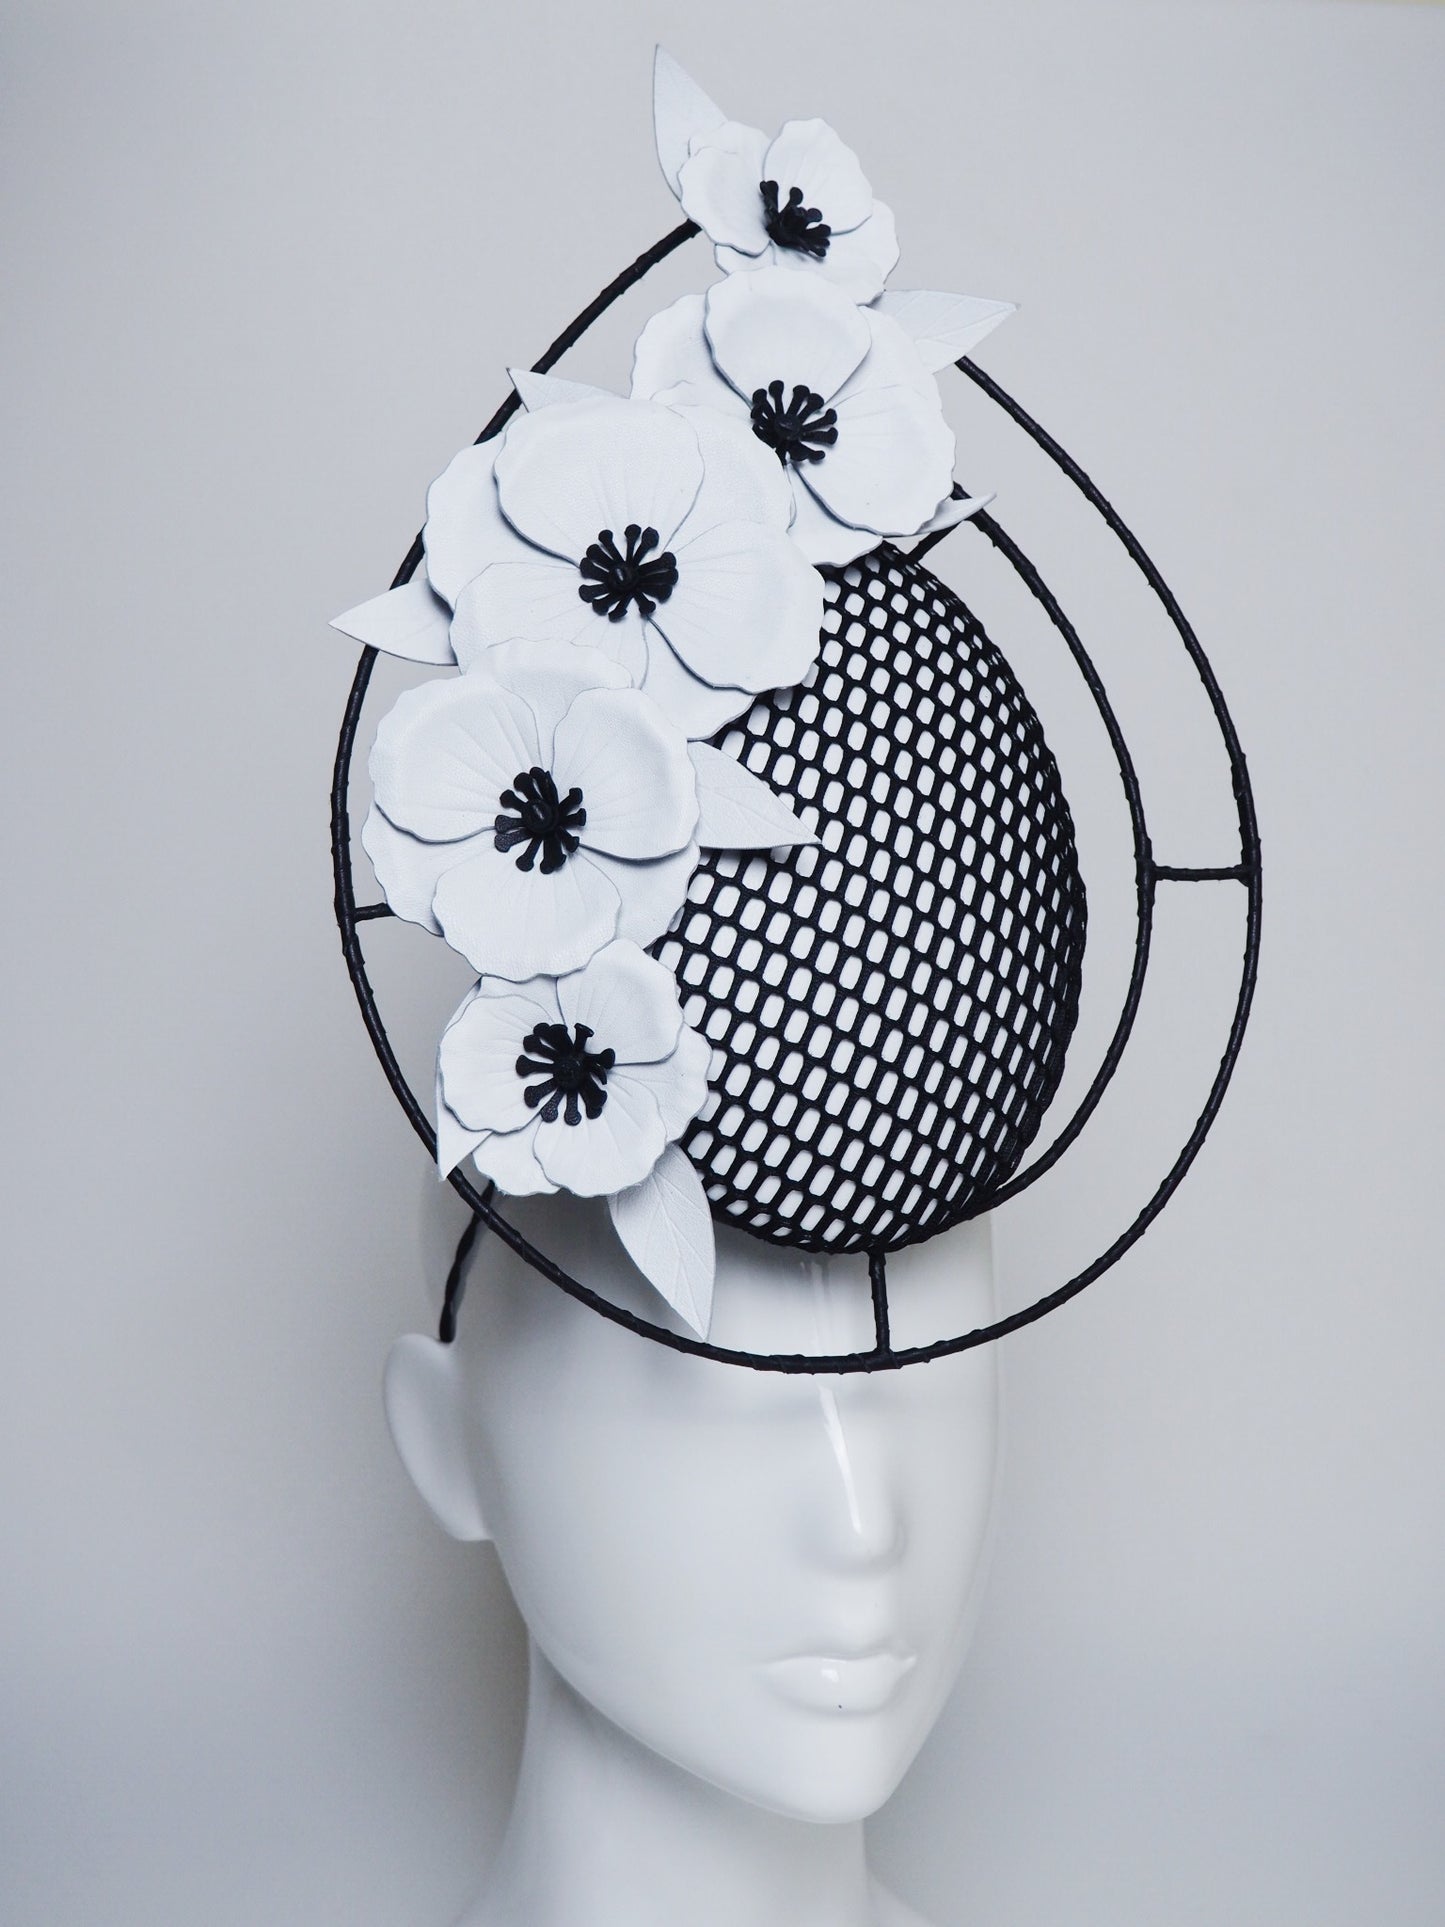 Derby Dazzler - Black and white mesh percher with wire frame.